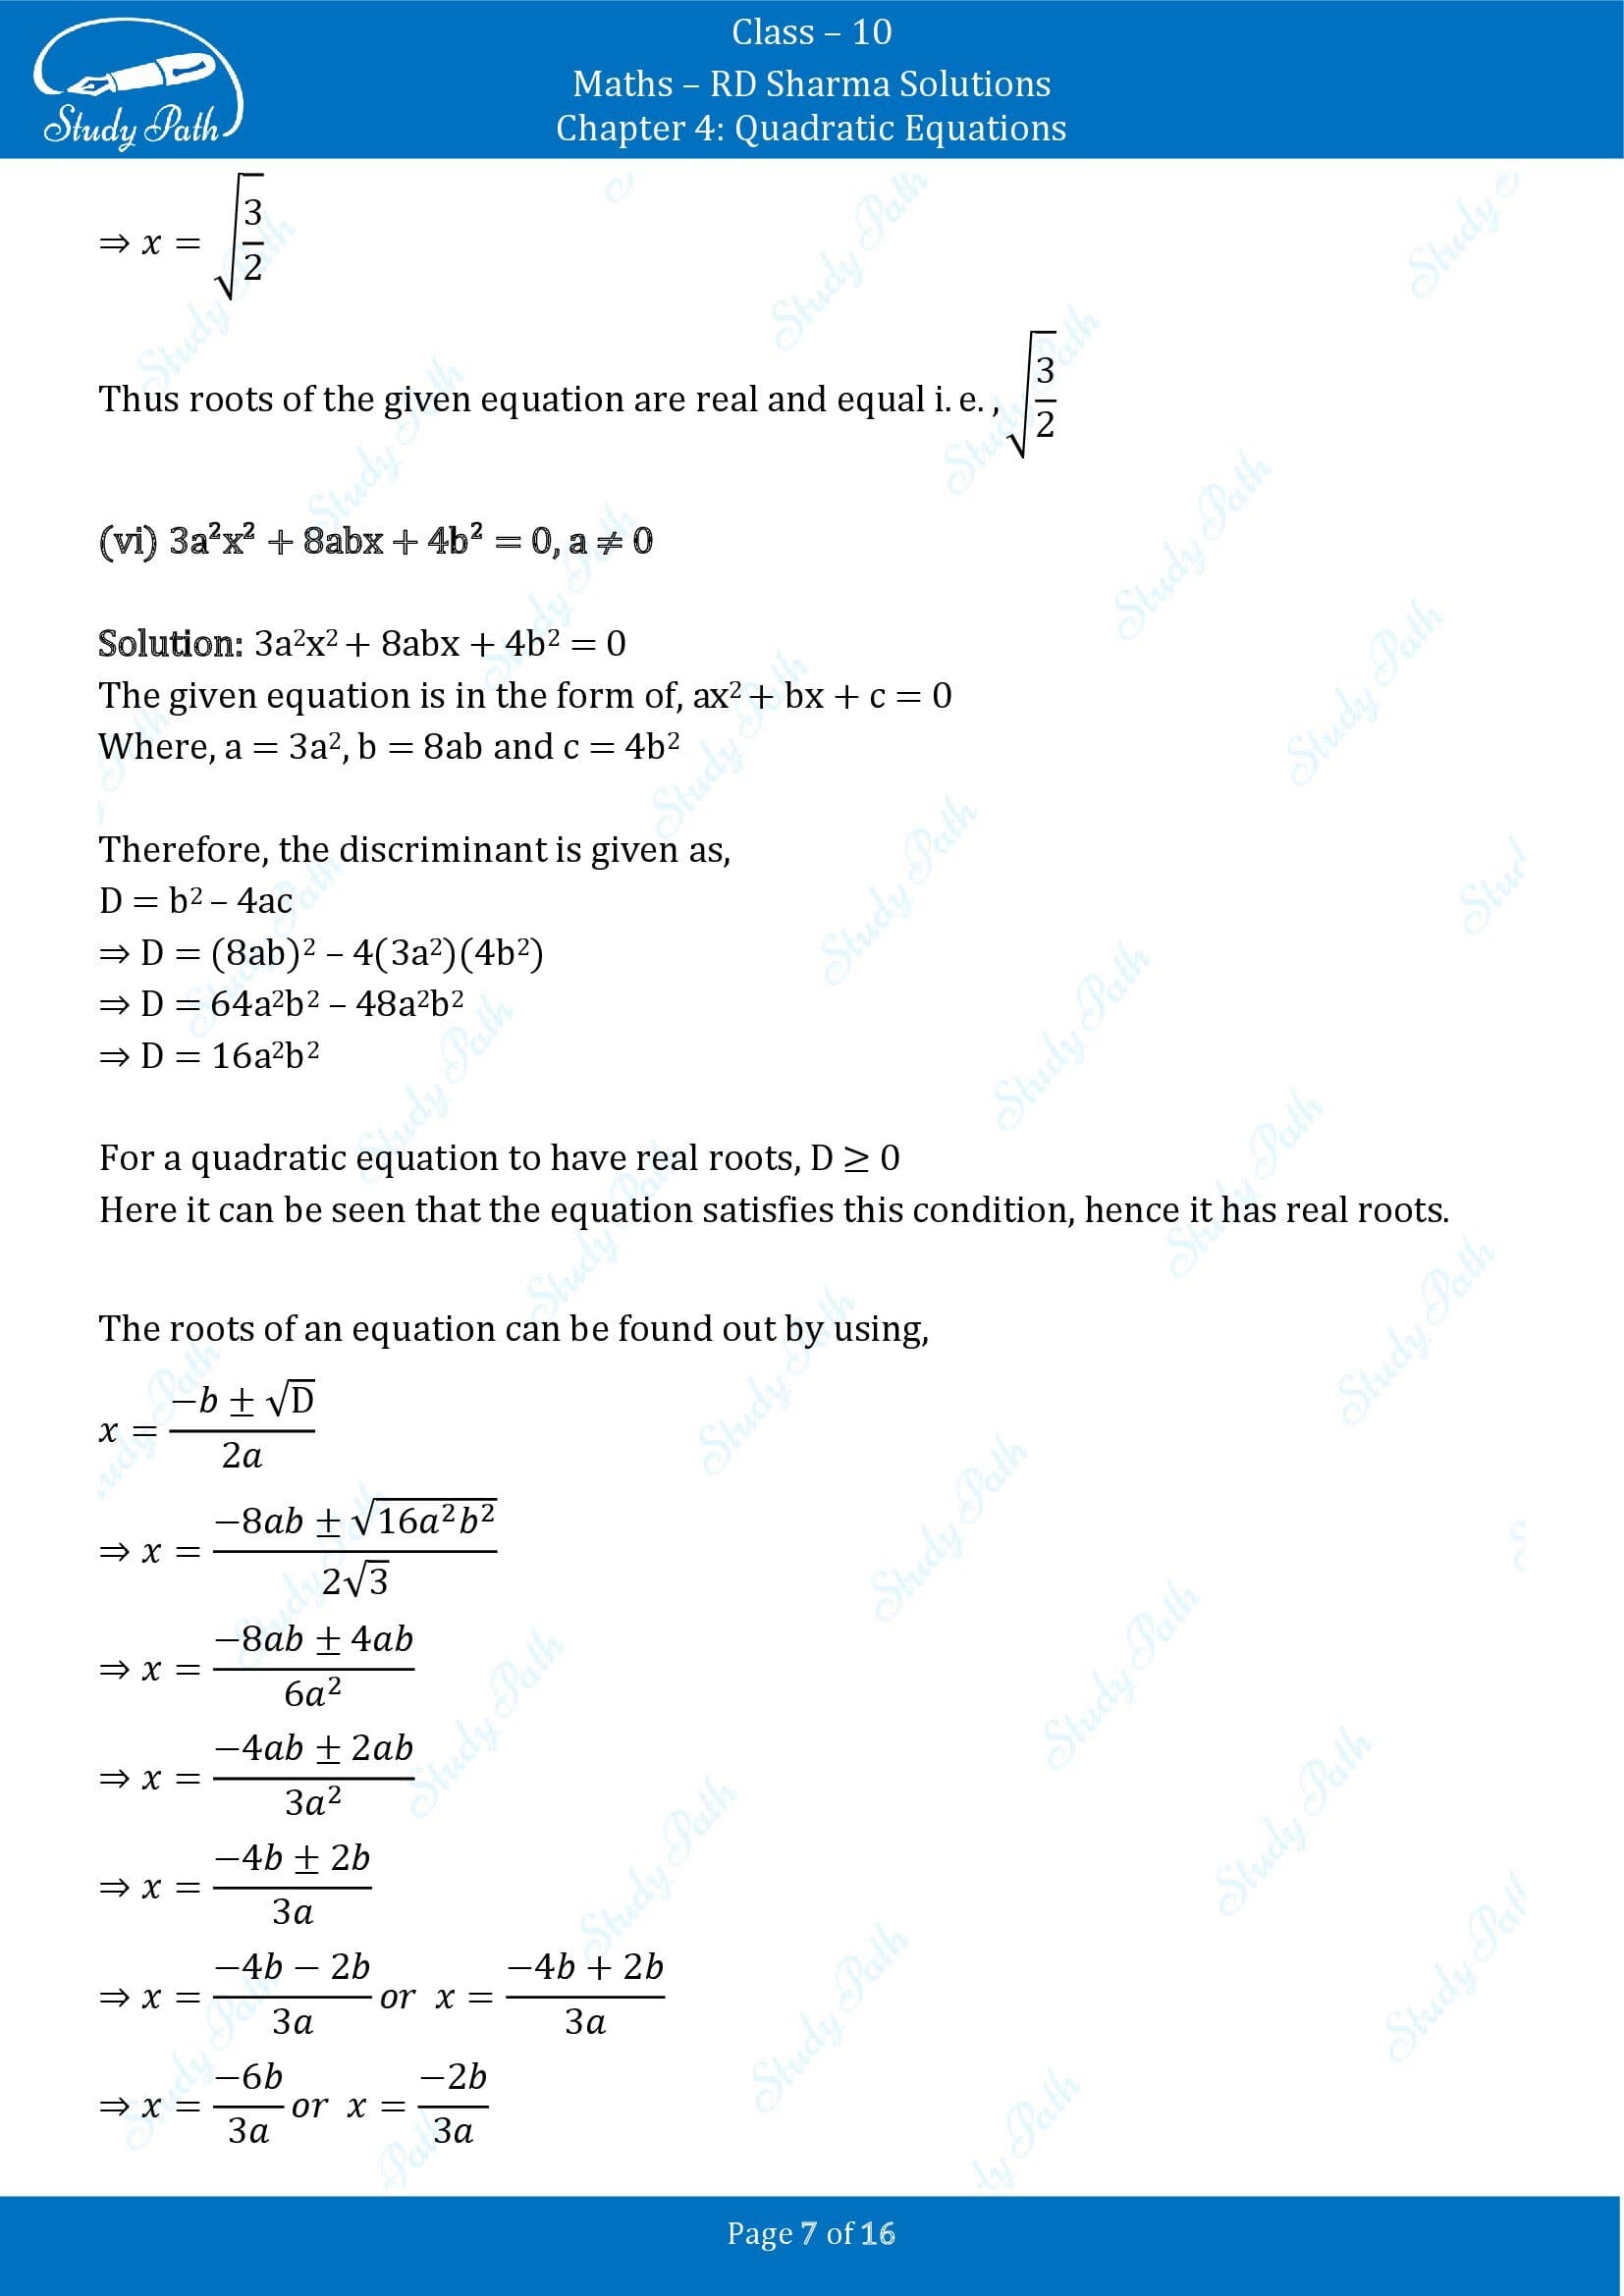 RD Sharma Solutions Class 10 Chapter 4 Quadratic Equations Exercise 4.5 00007